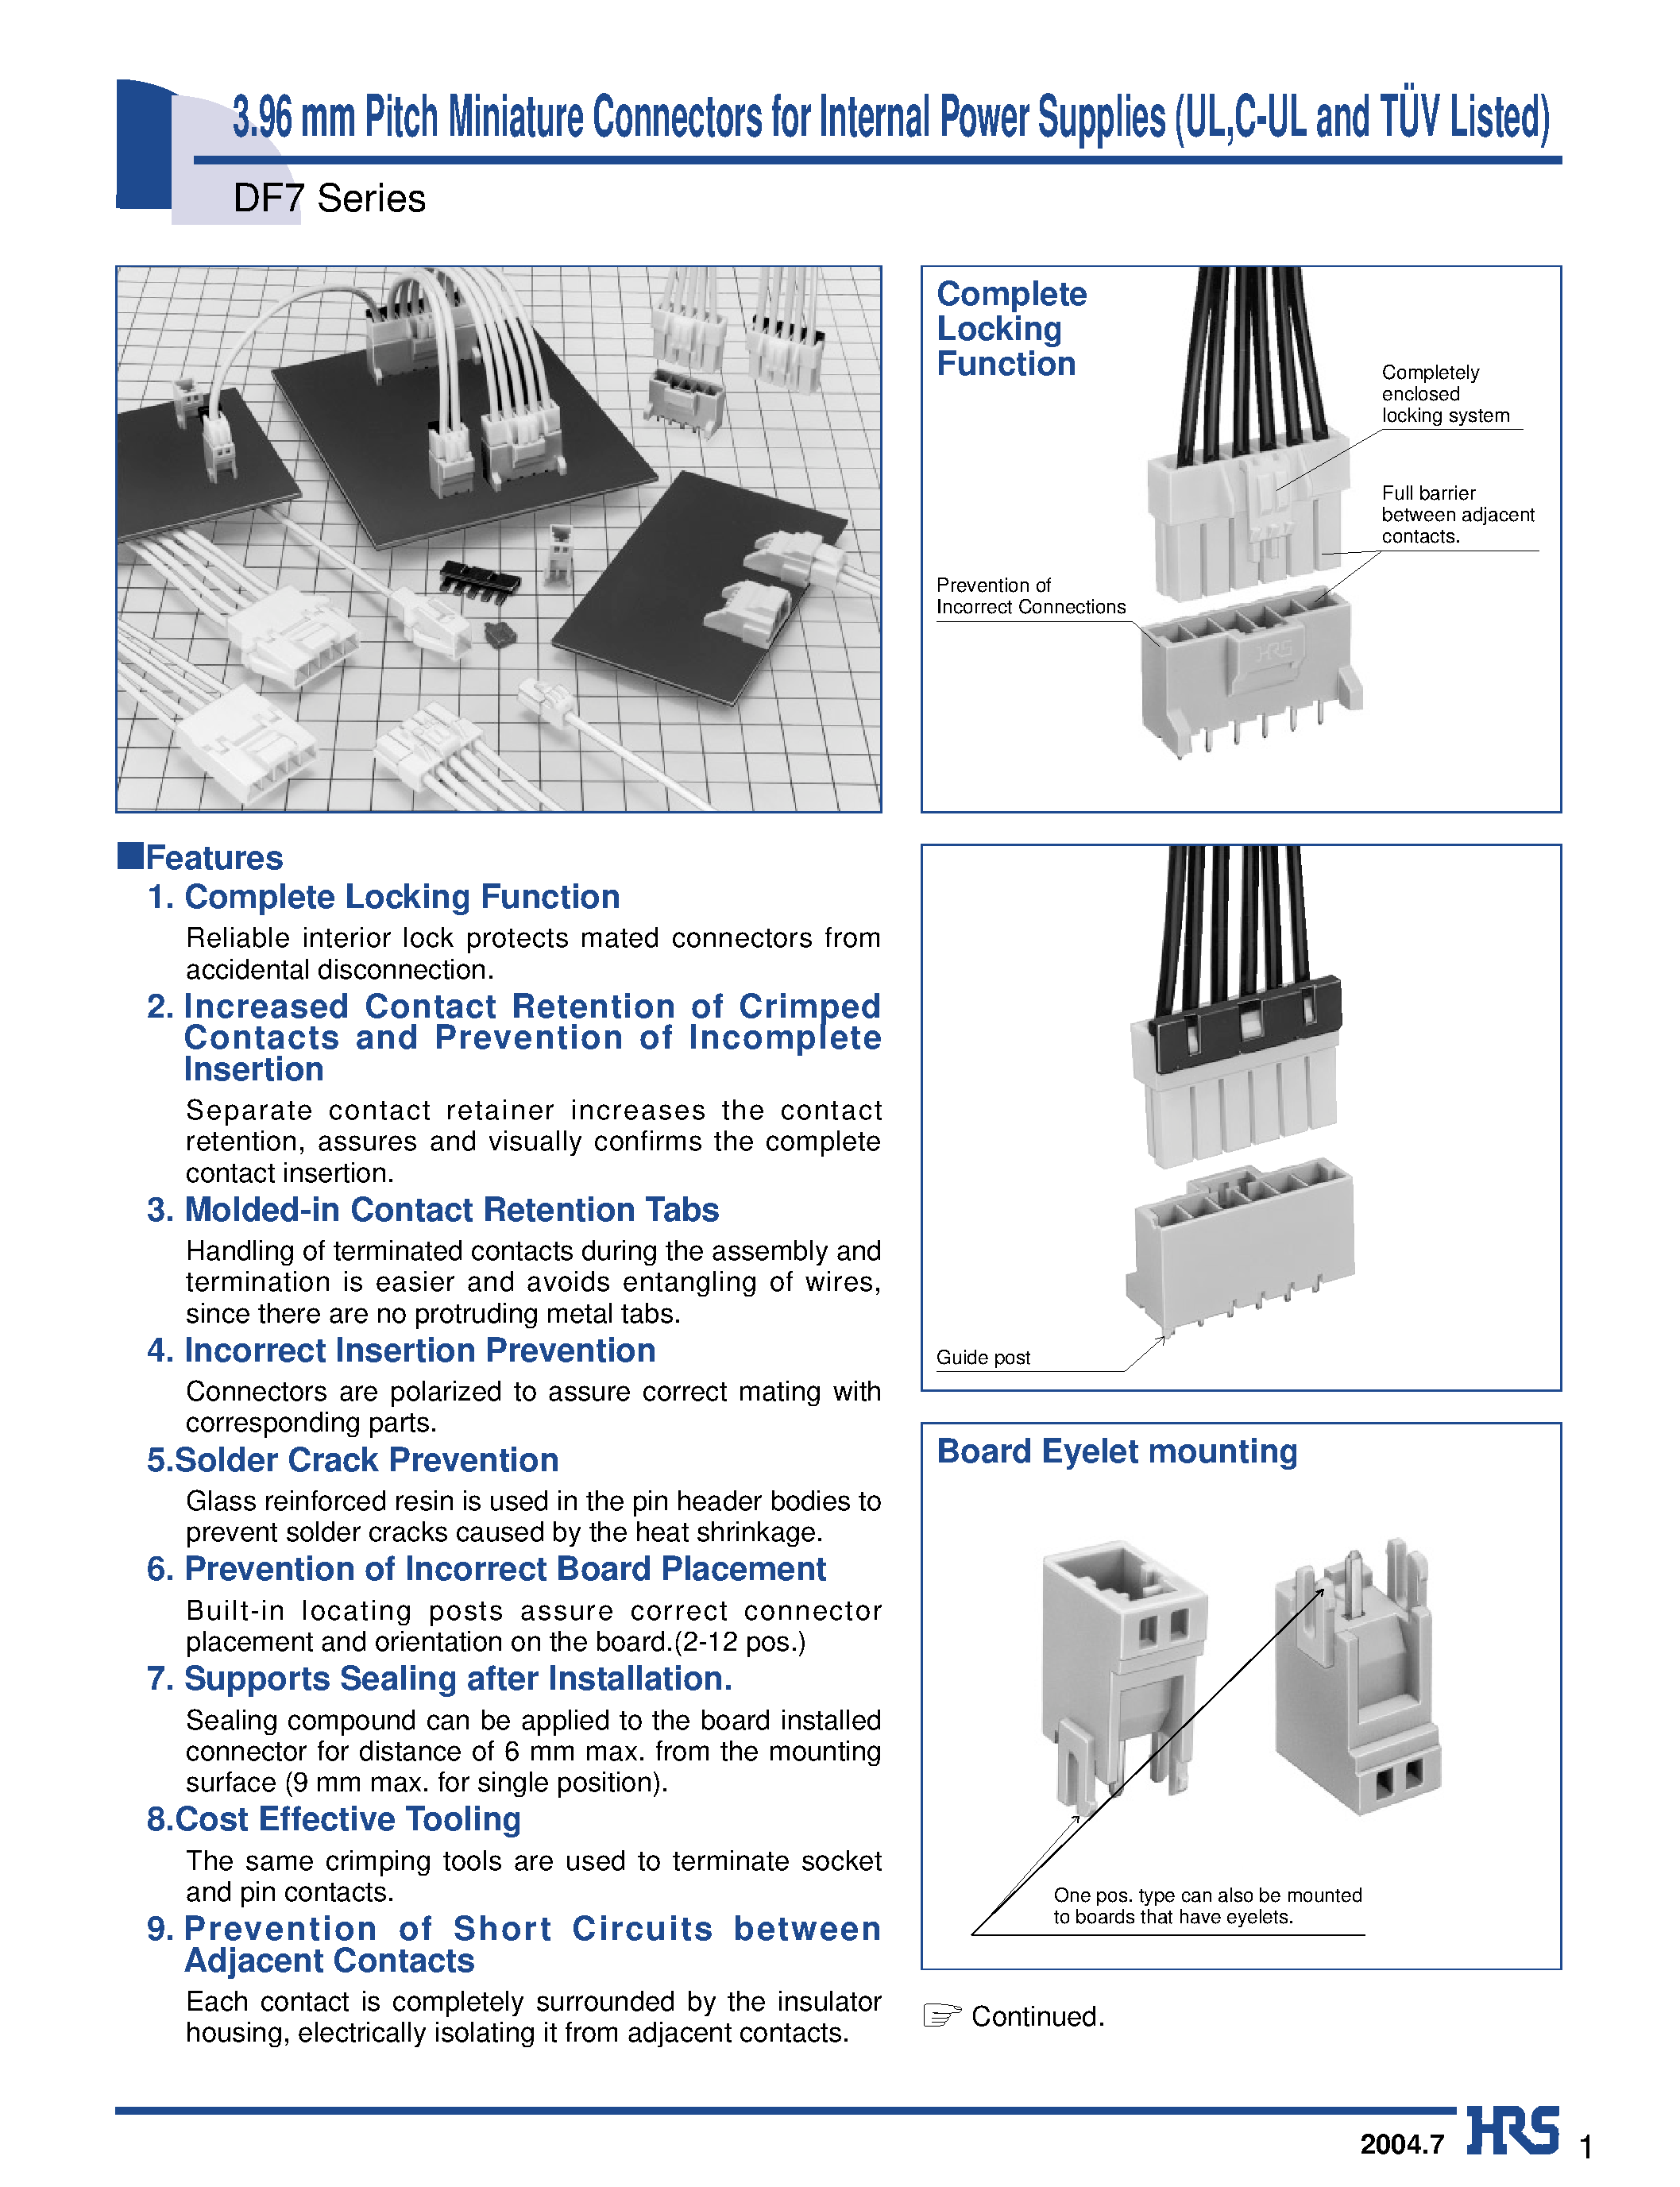 Datasheet DF7-3DS-3.96DSA - 3.96 mm Pitch Miniature Connectors for Internal Power Supplies (UL /C-UL and TUV Listed) page 1